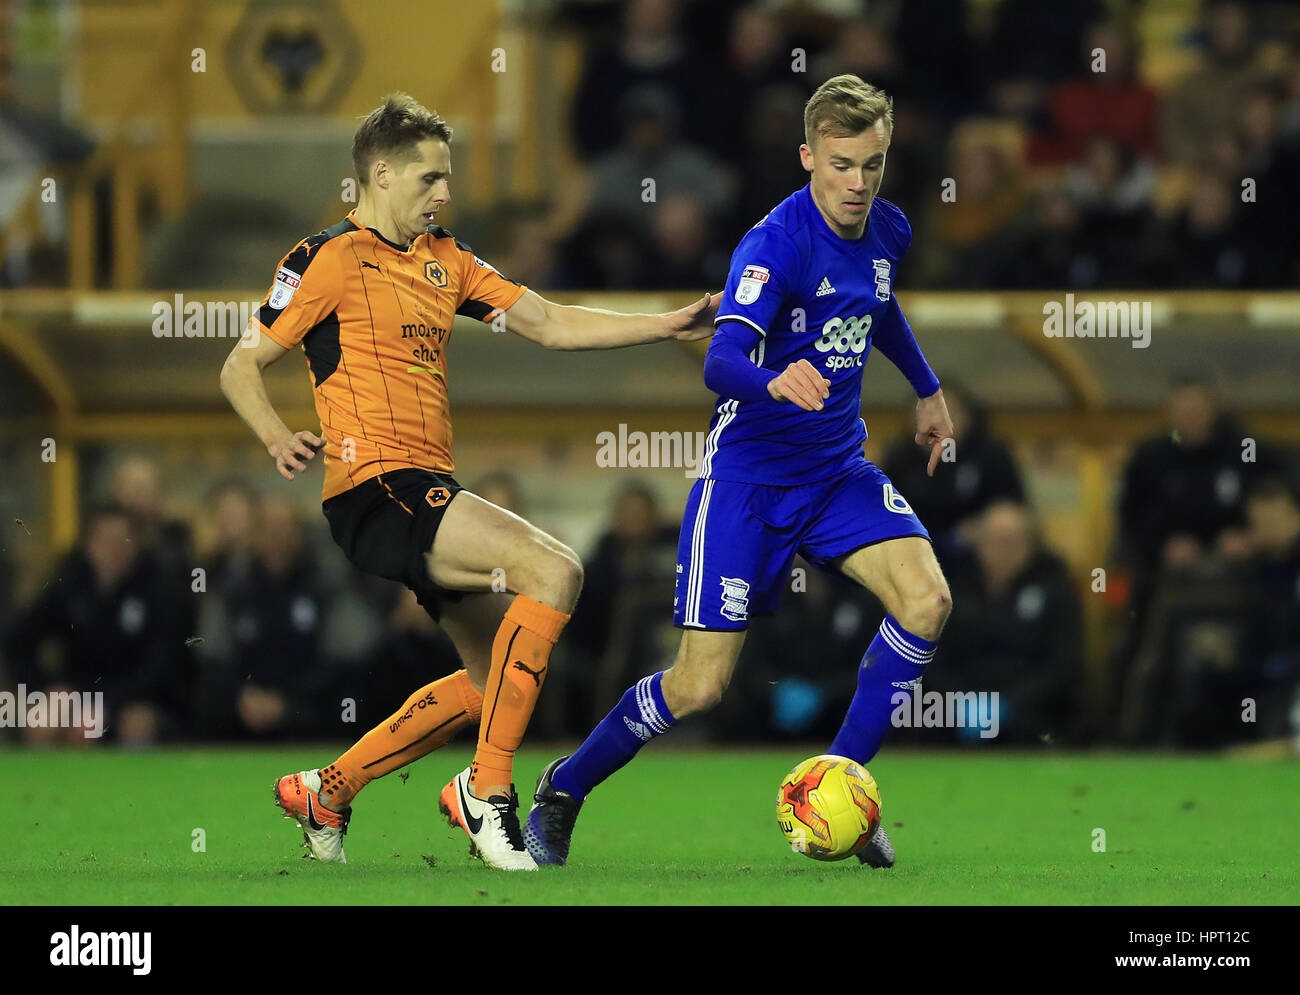 Wolverhampton Wanderers' David Edwards (left) and Birmingham City's Maikel Kieftenbeld battle for the ball during the Sky Bet Championship match at Molineux, Wolverhampton. Stock Photo